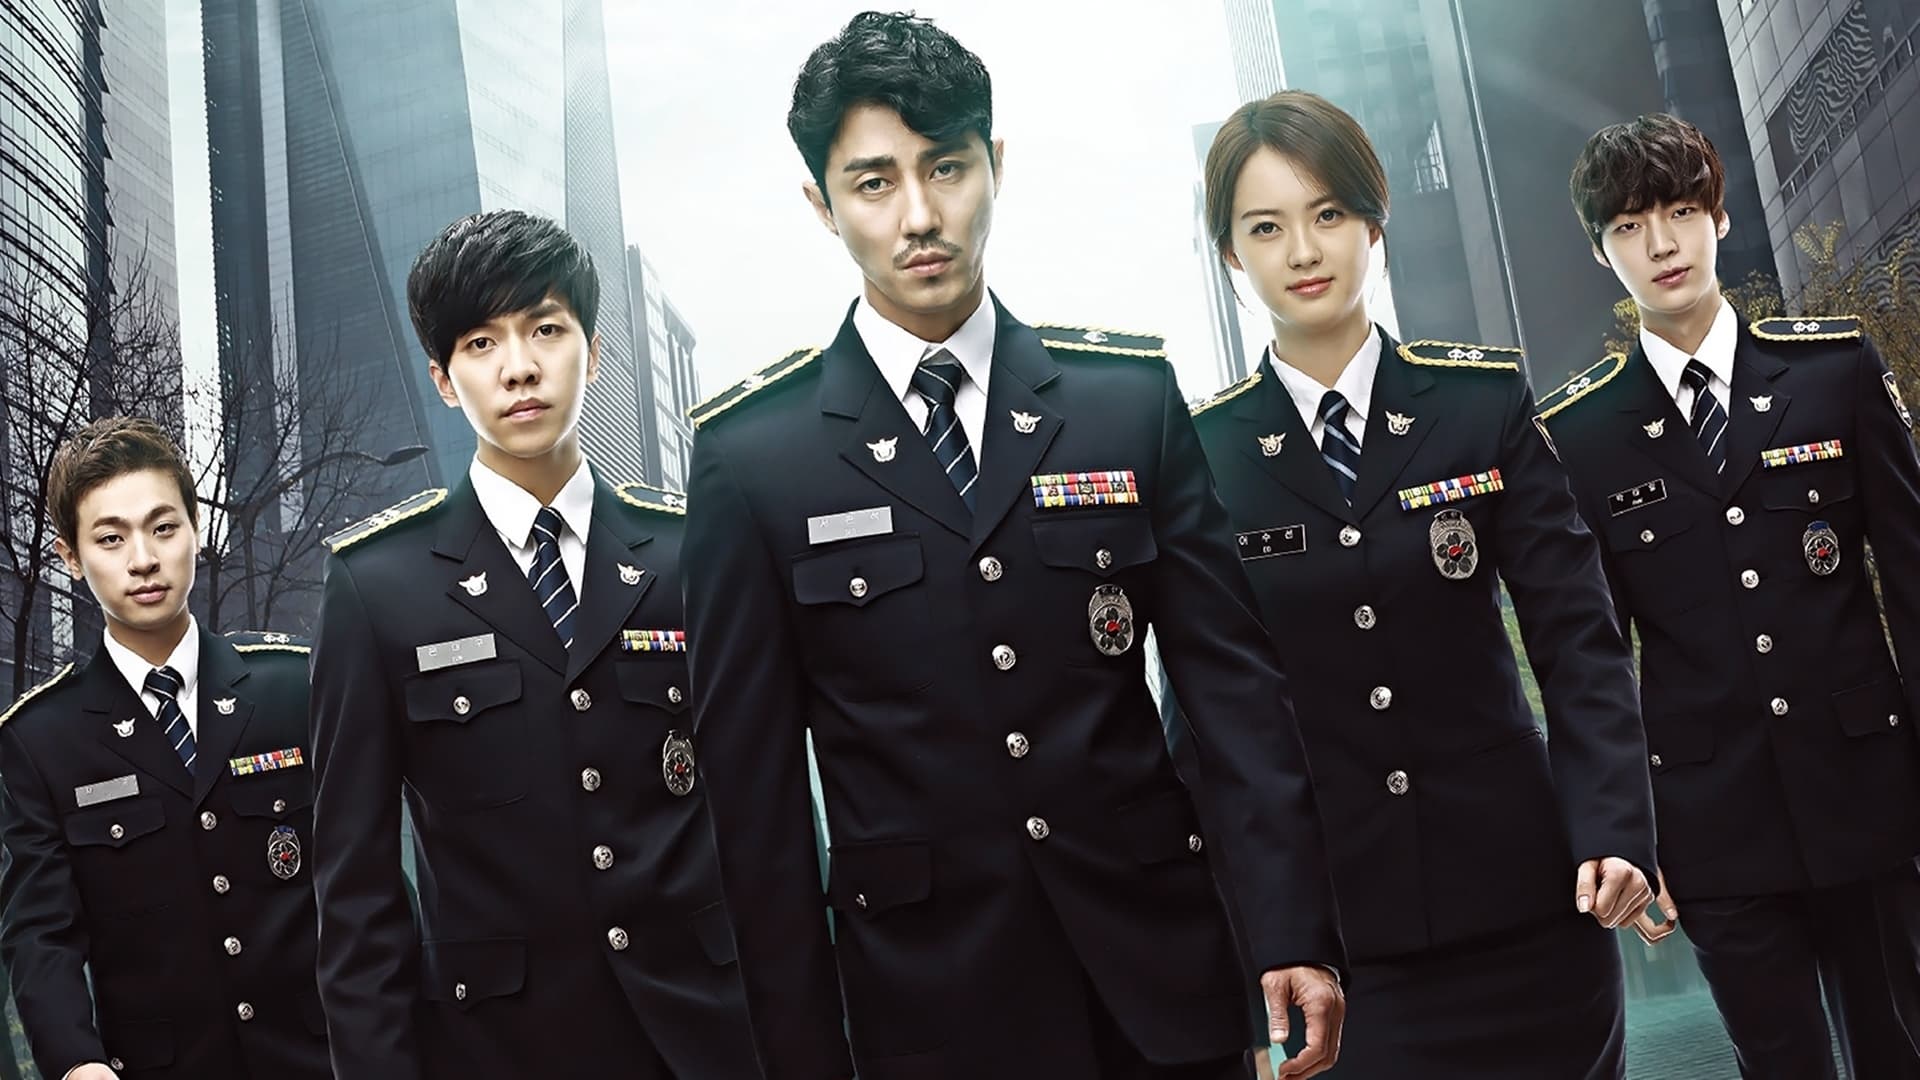 You Are All Surrounded izle